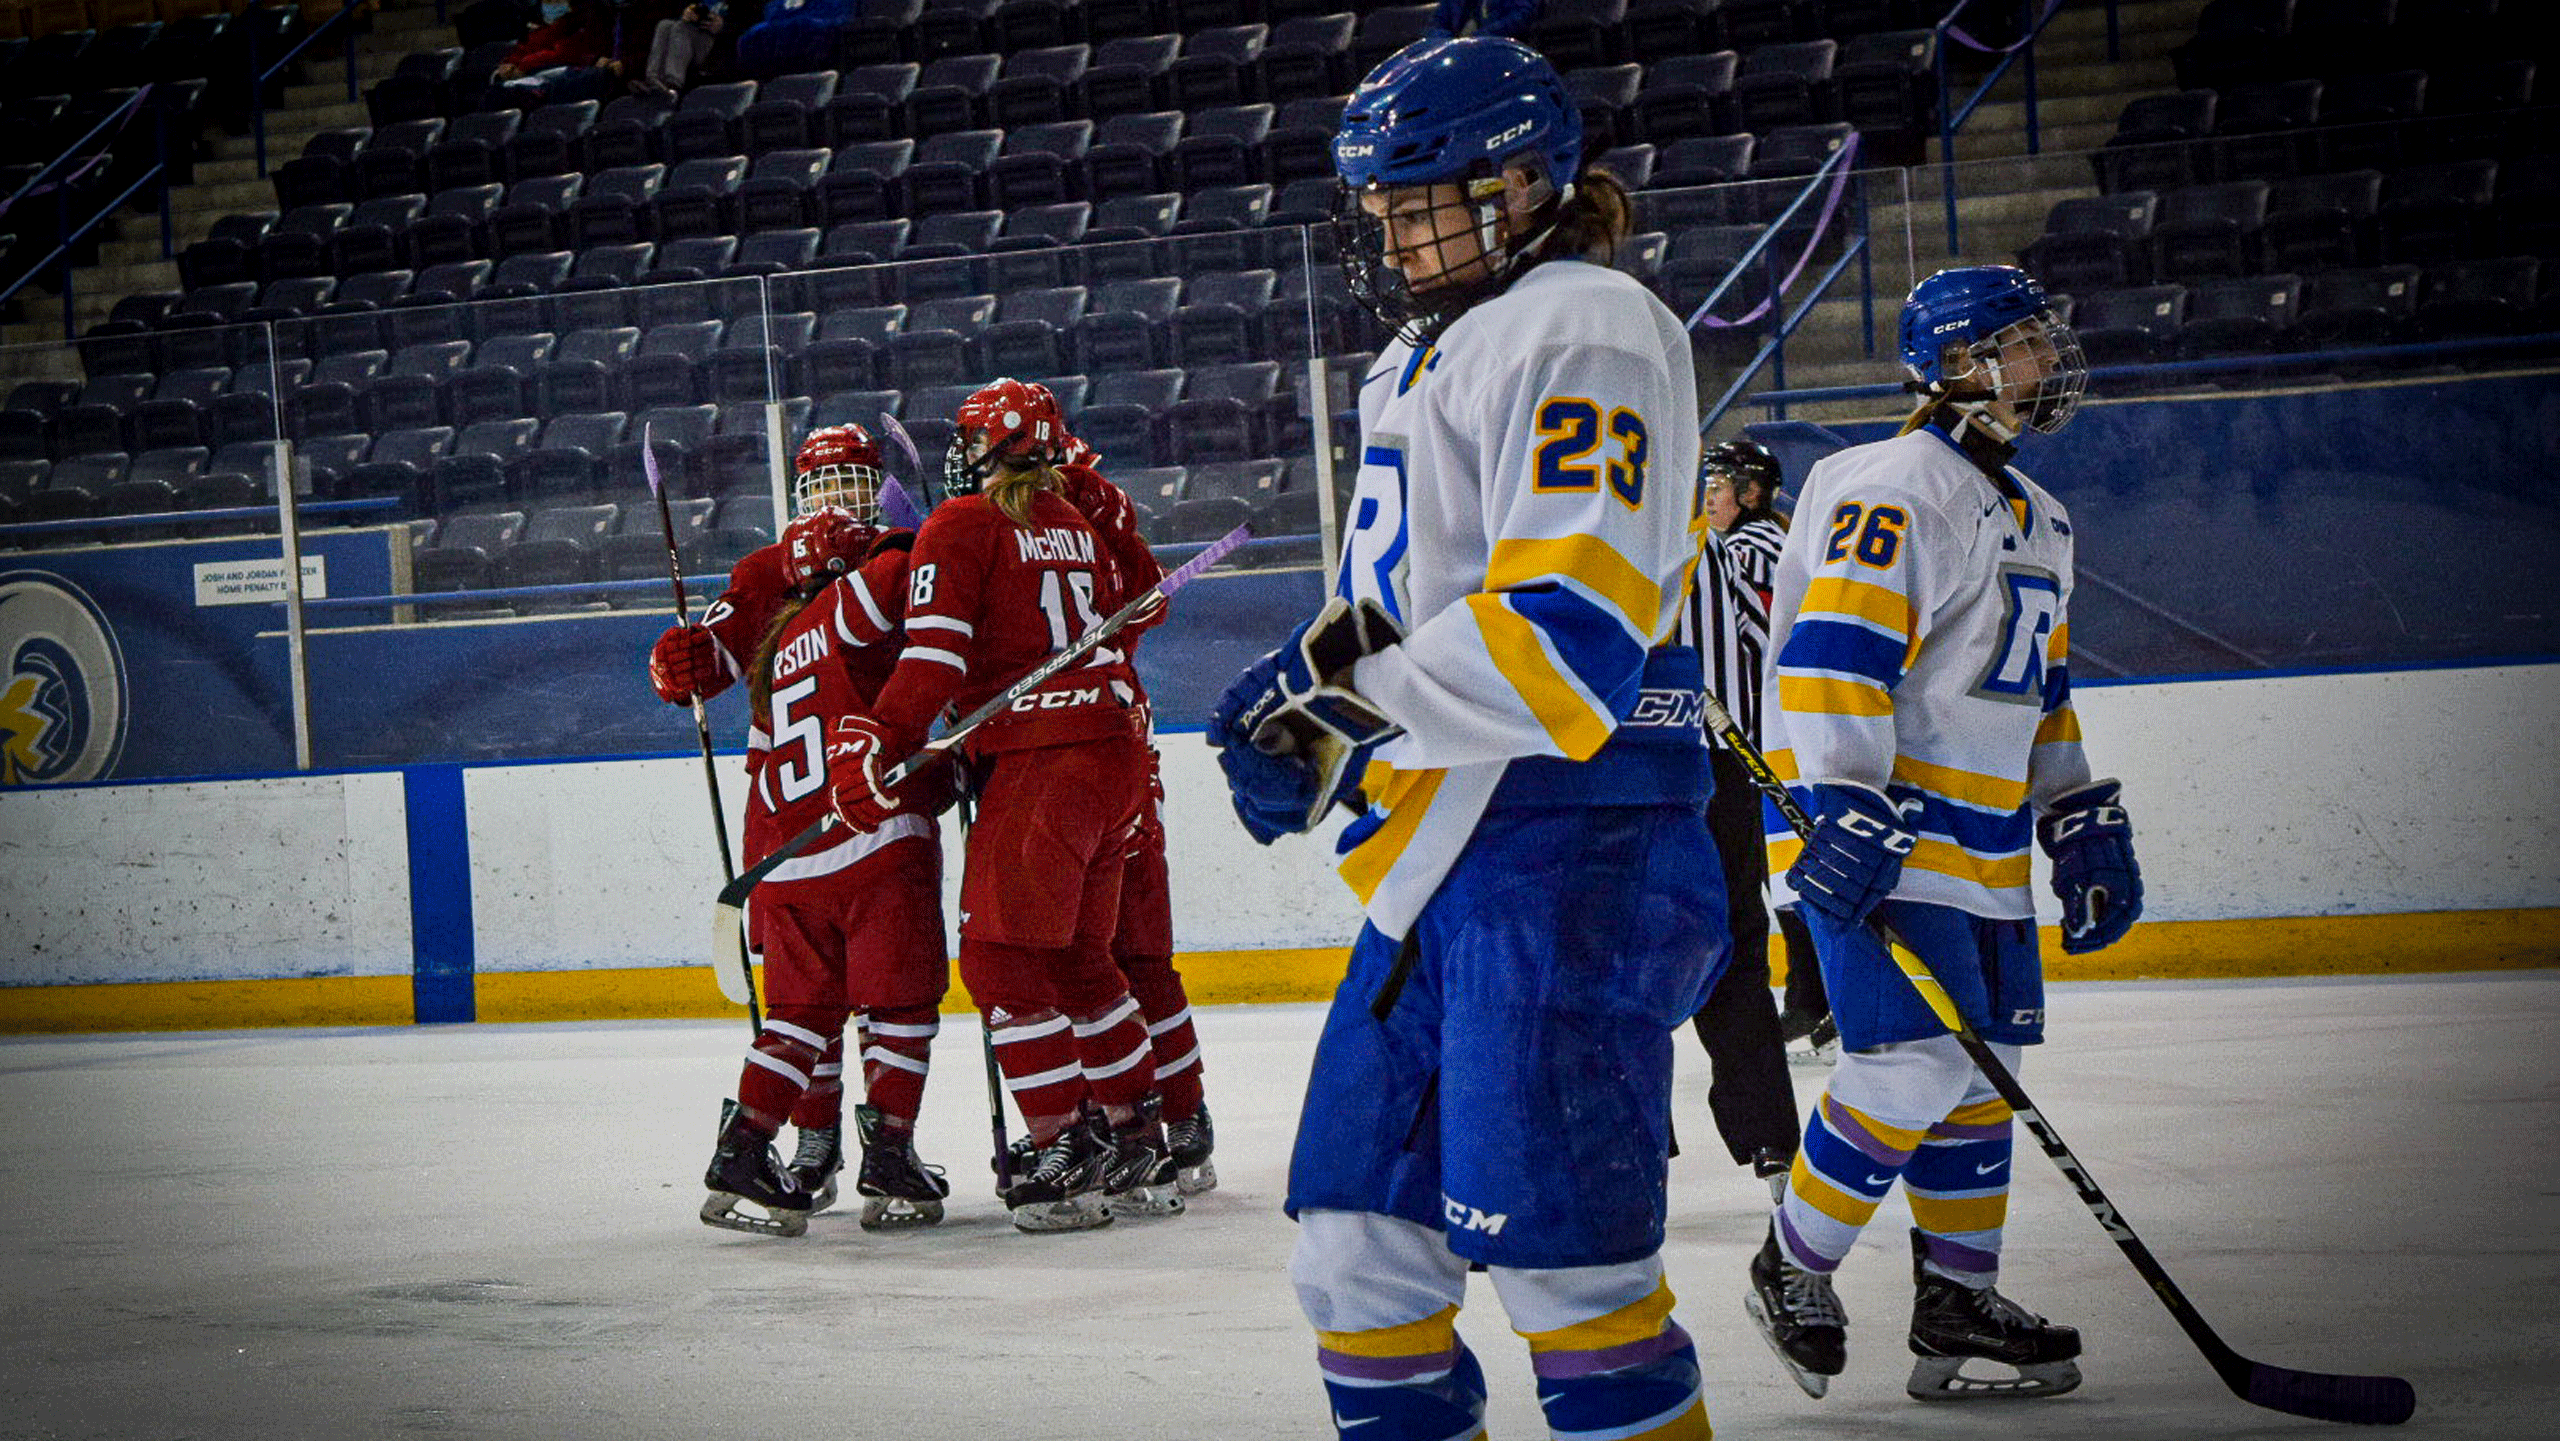 The York Lions in red jerseys celebrate a goal